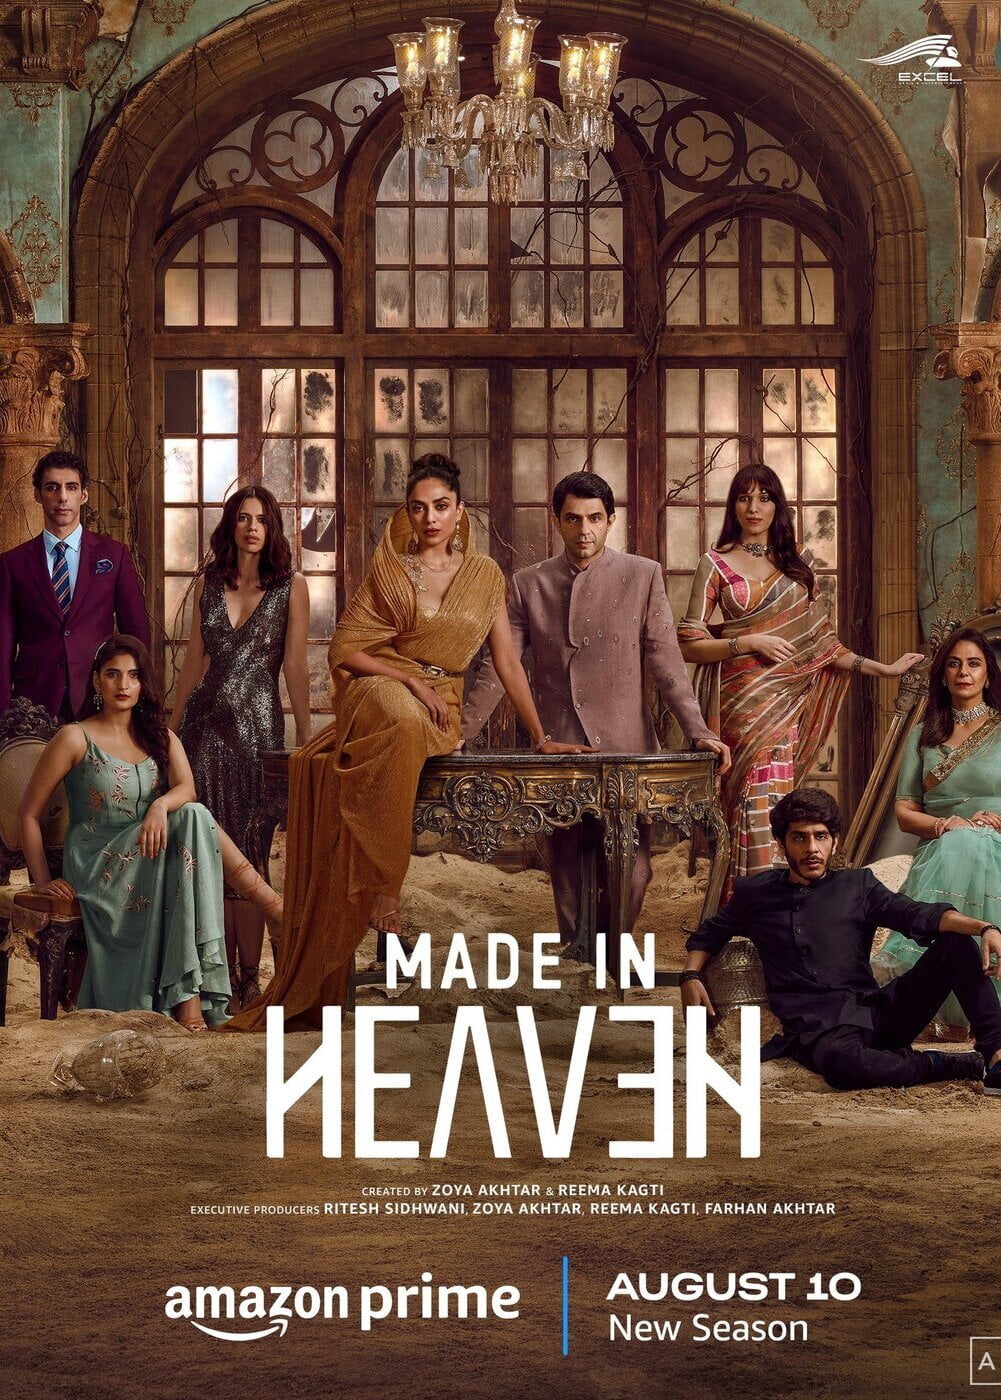 Why Does The Gold Digger Dig Gold?' A Look Into Tara Khanna's Character Arc  In 'Made In Heaven